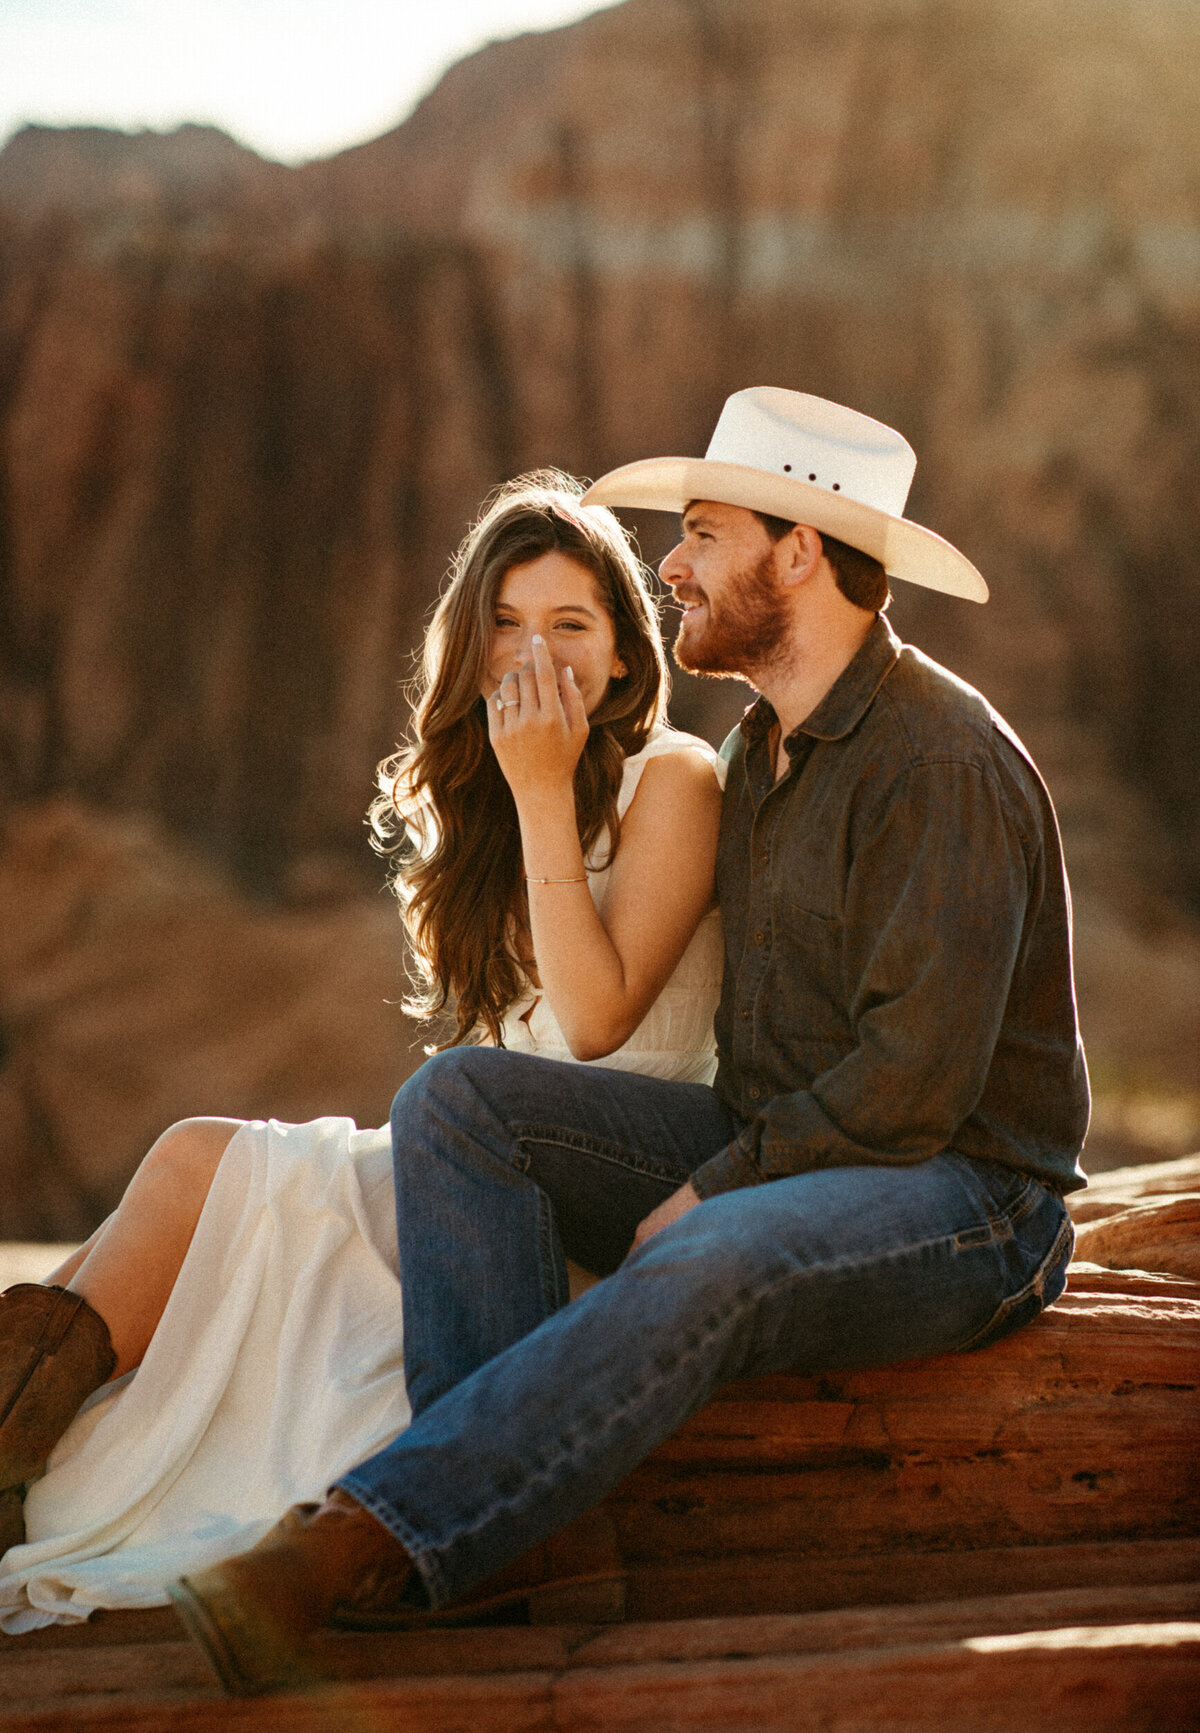 snow-canyon-state-park-petrified-sand-dunes-st-george-southern-utah-hiking-engagement-session-couples-photoshoot-30